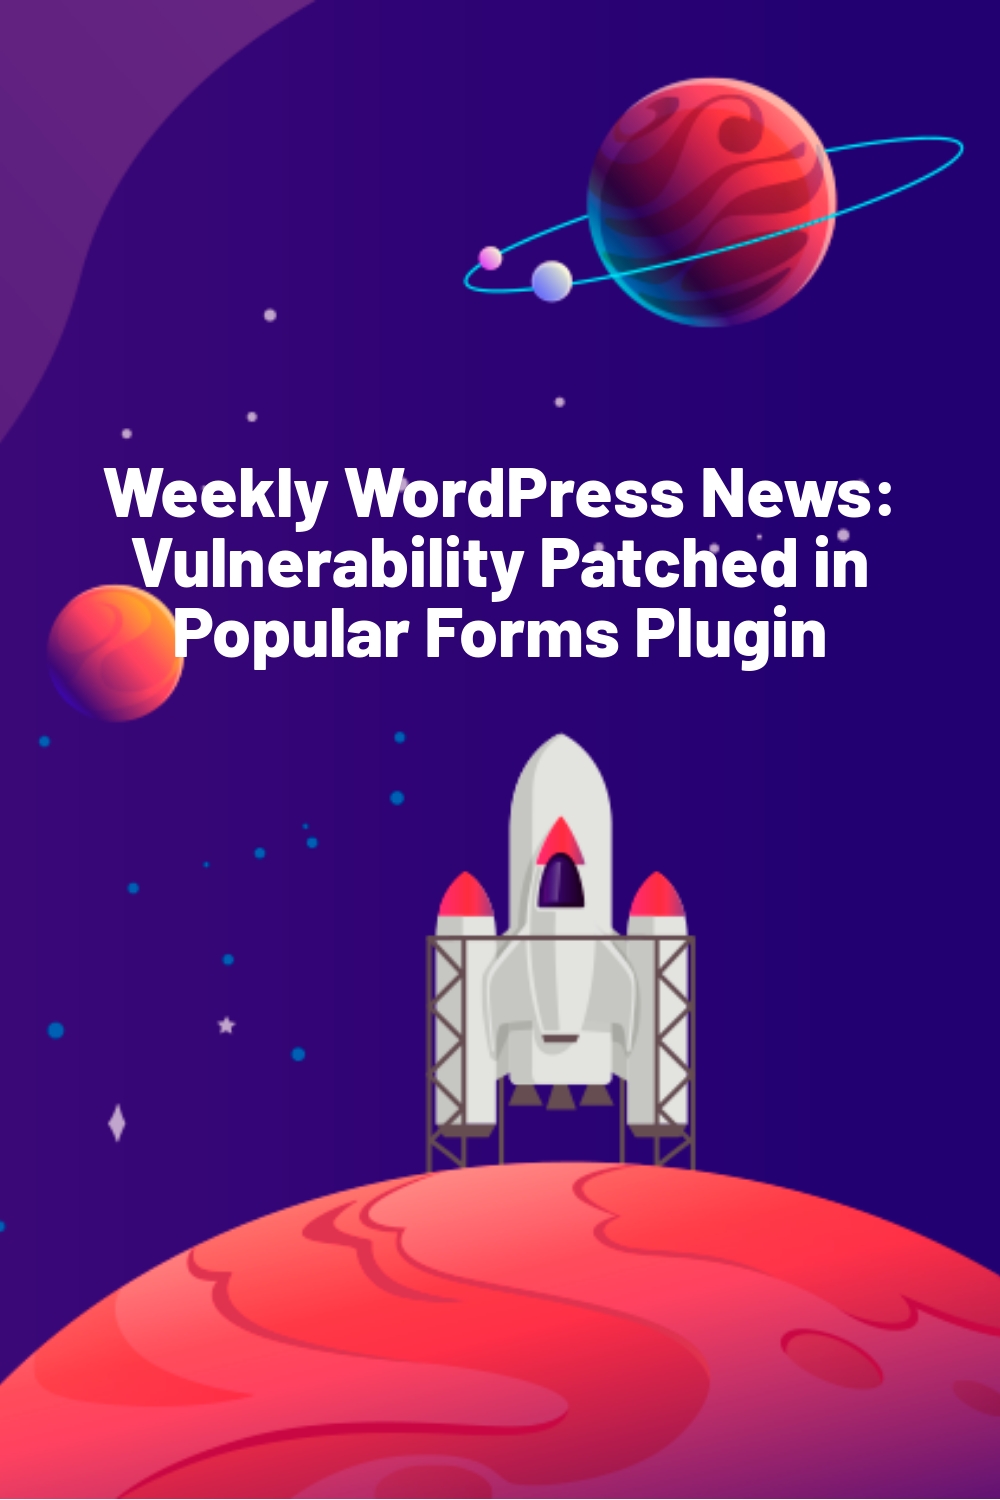 Weekly WordPress News: Vulnerability Patched in Popular Forms Plugin